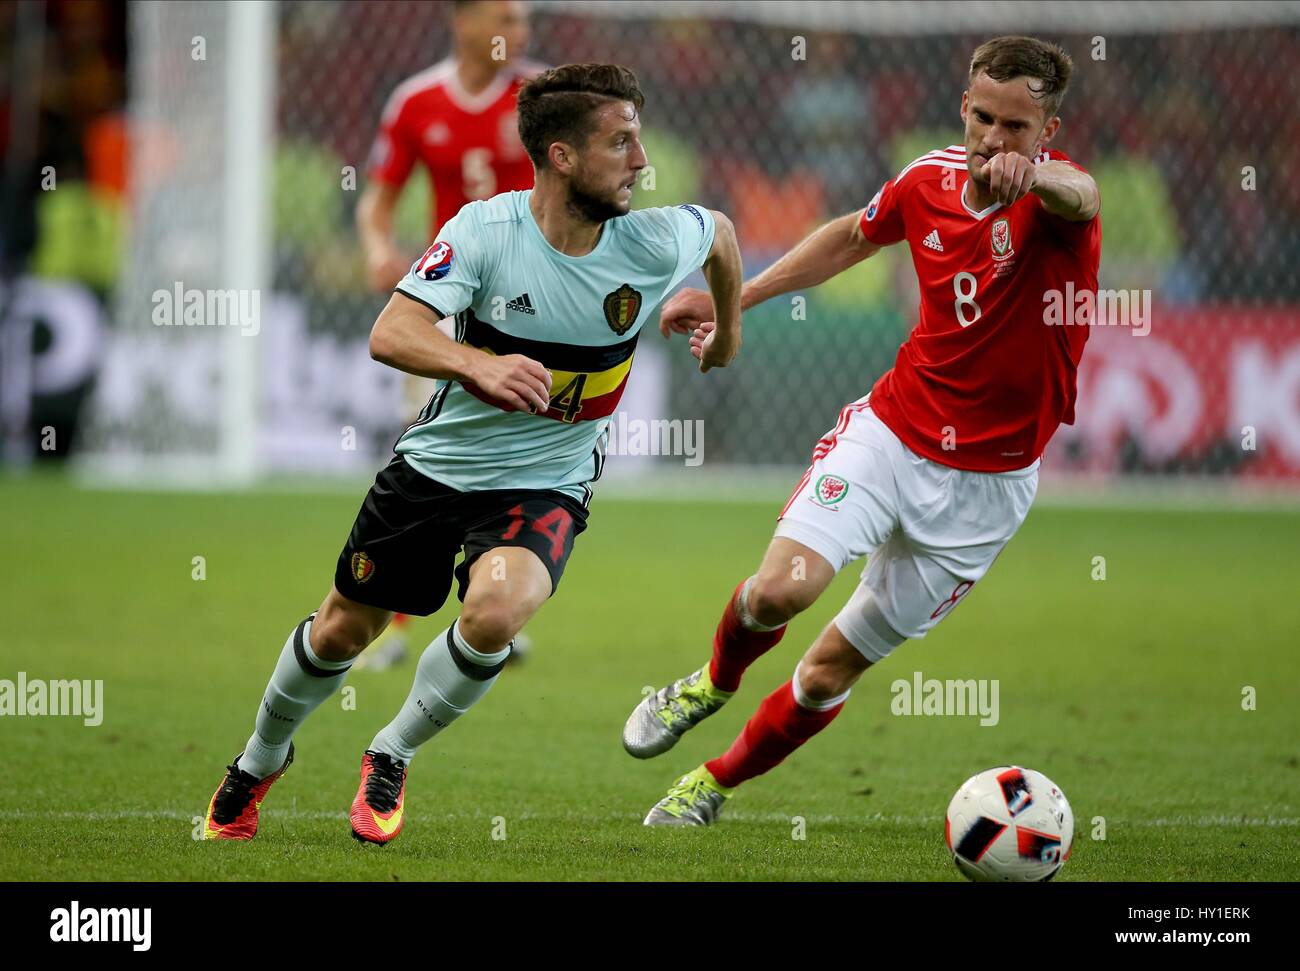 DRIES MERTENS AND ANDY KING WALES V BELGIUM STADE PIERRE-MAUROY LILLE FRANCE 01 July 2016 Stock Photo